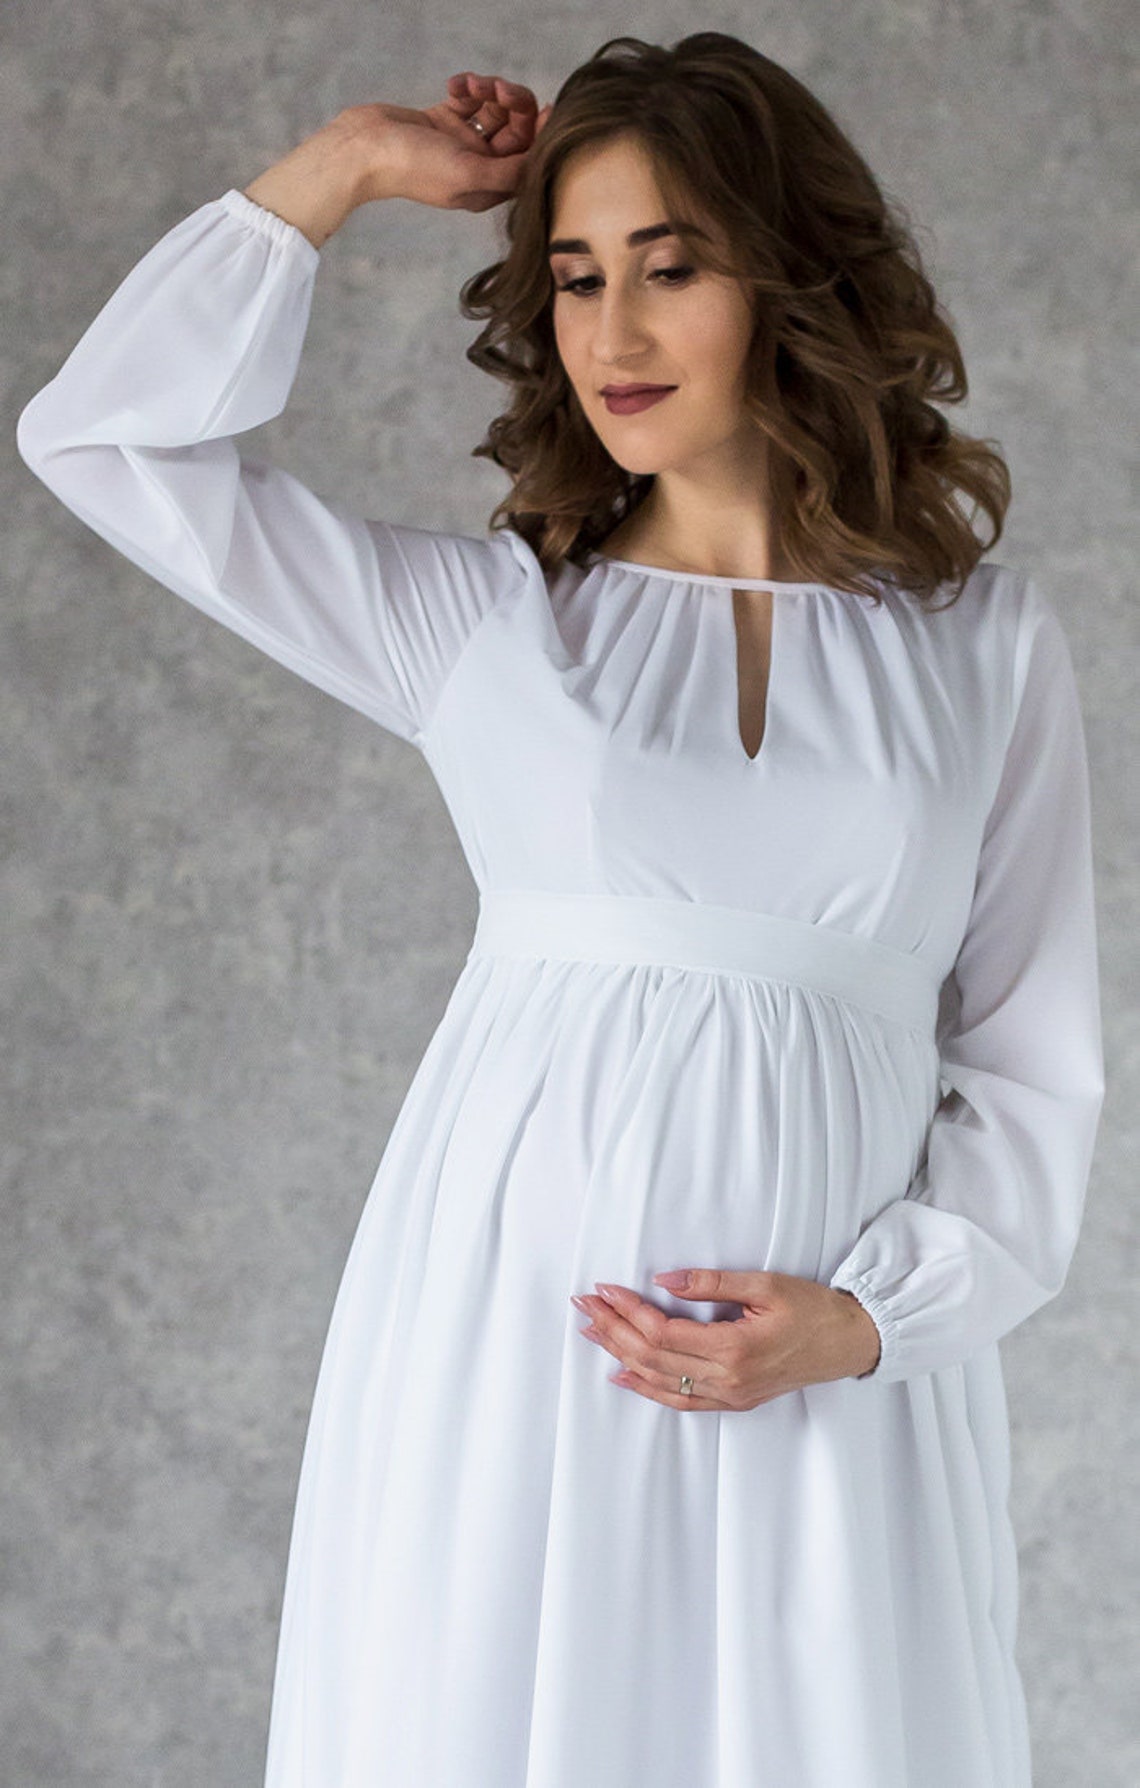 Maternity Cocktail Flowy Dress With Long Sleeves / Midi dress | Etsy